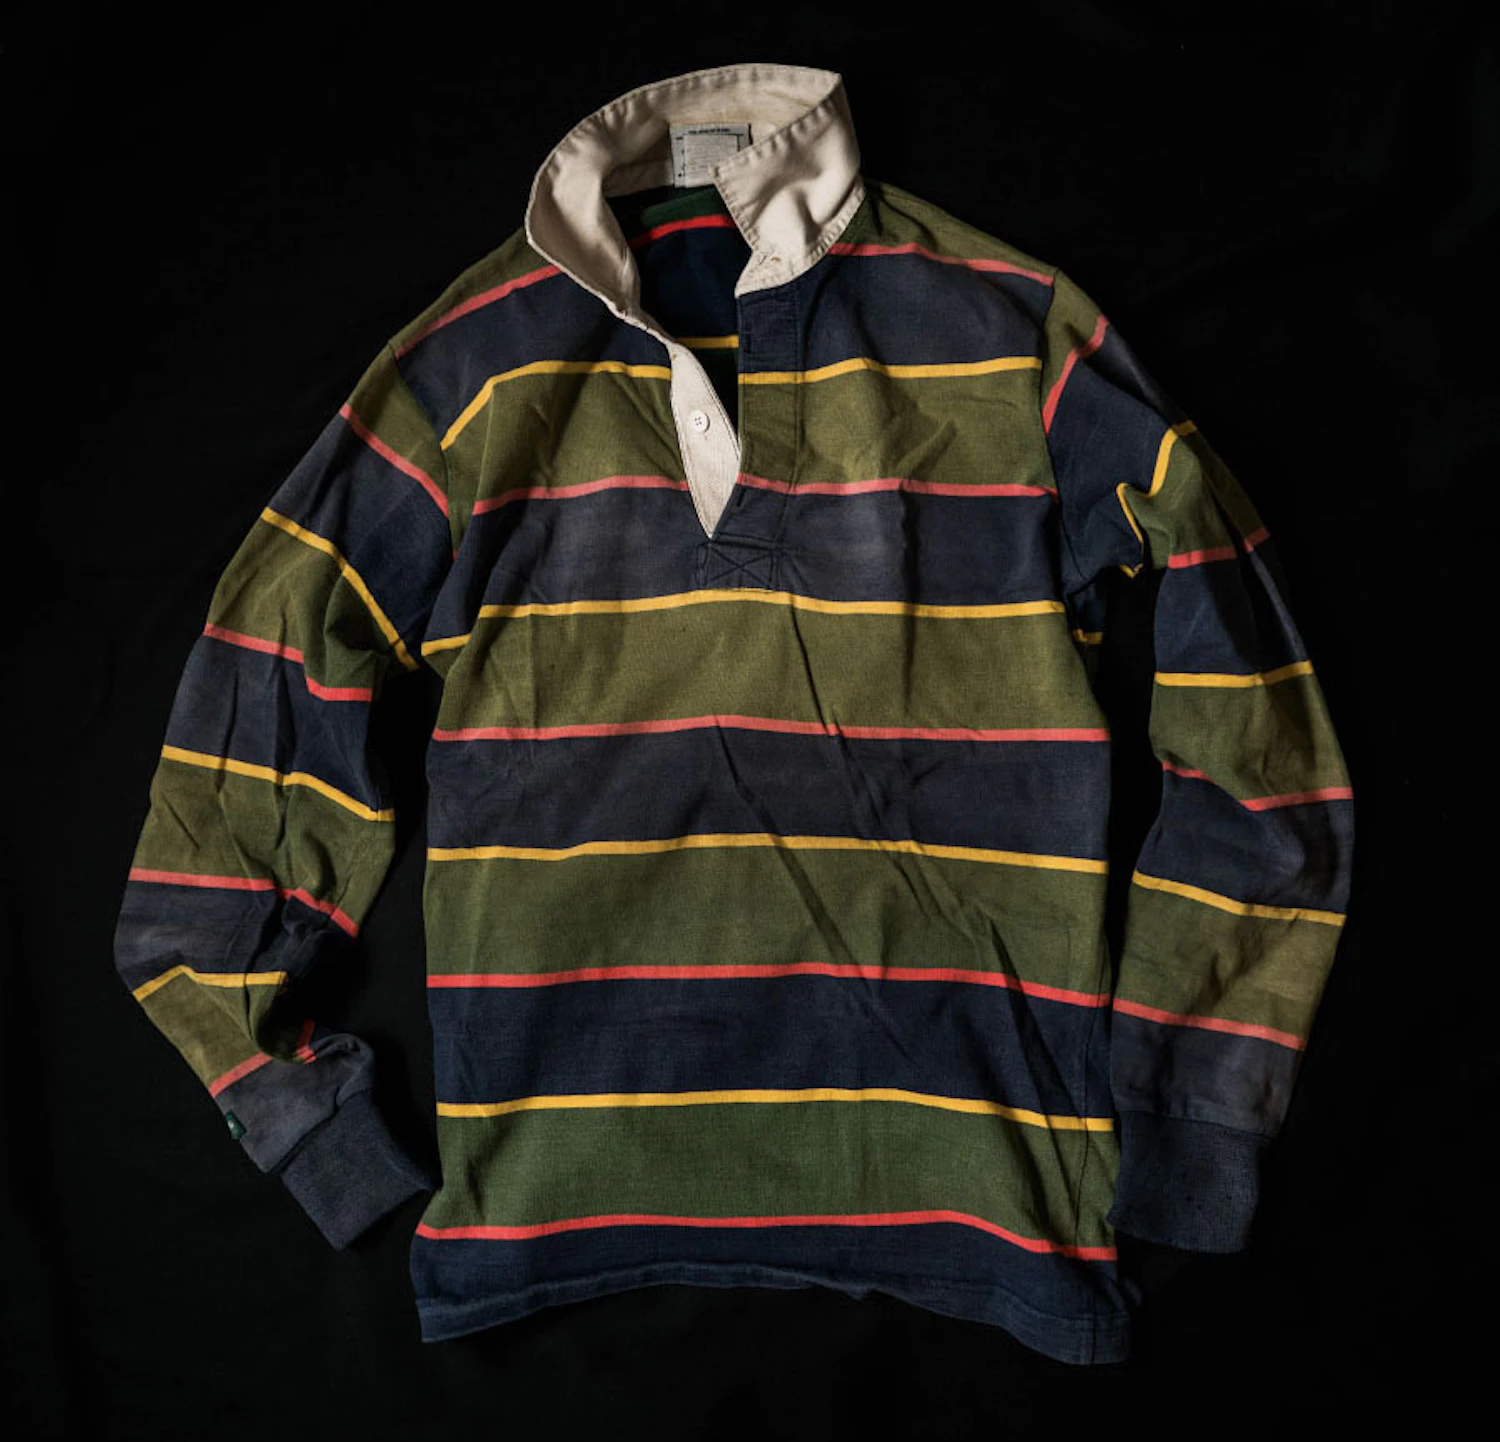 A rugby shirt with Alternating Pinstripes pattern, worn for about 15 years